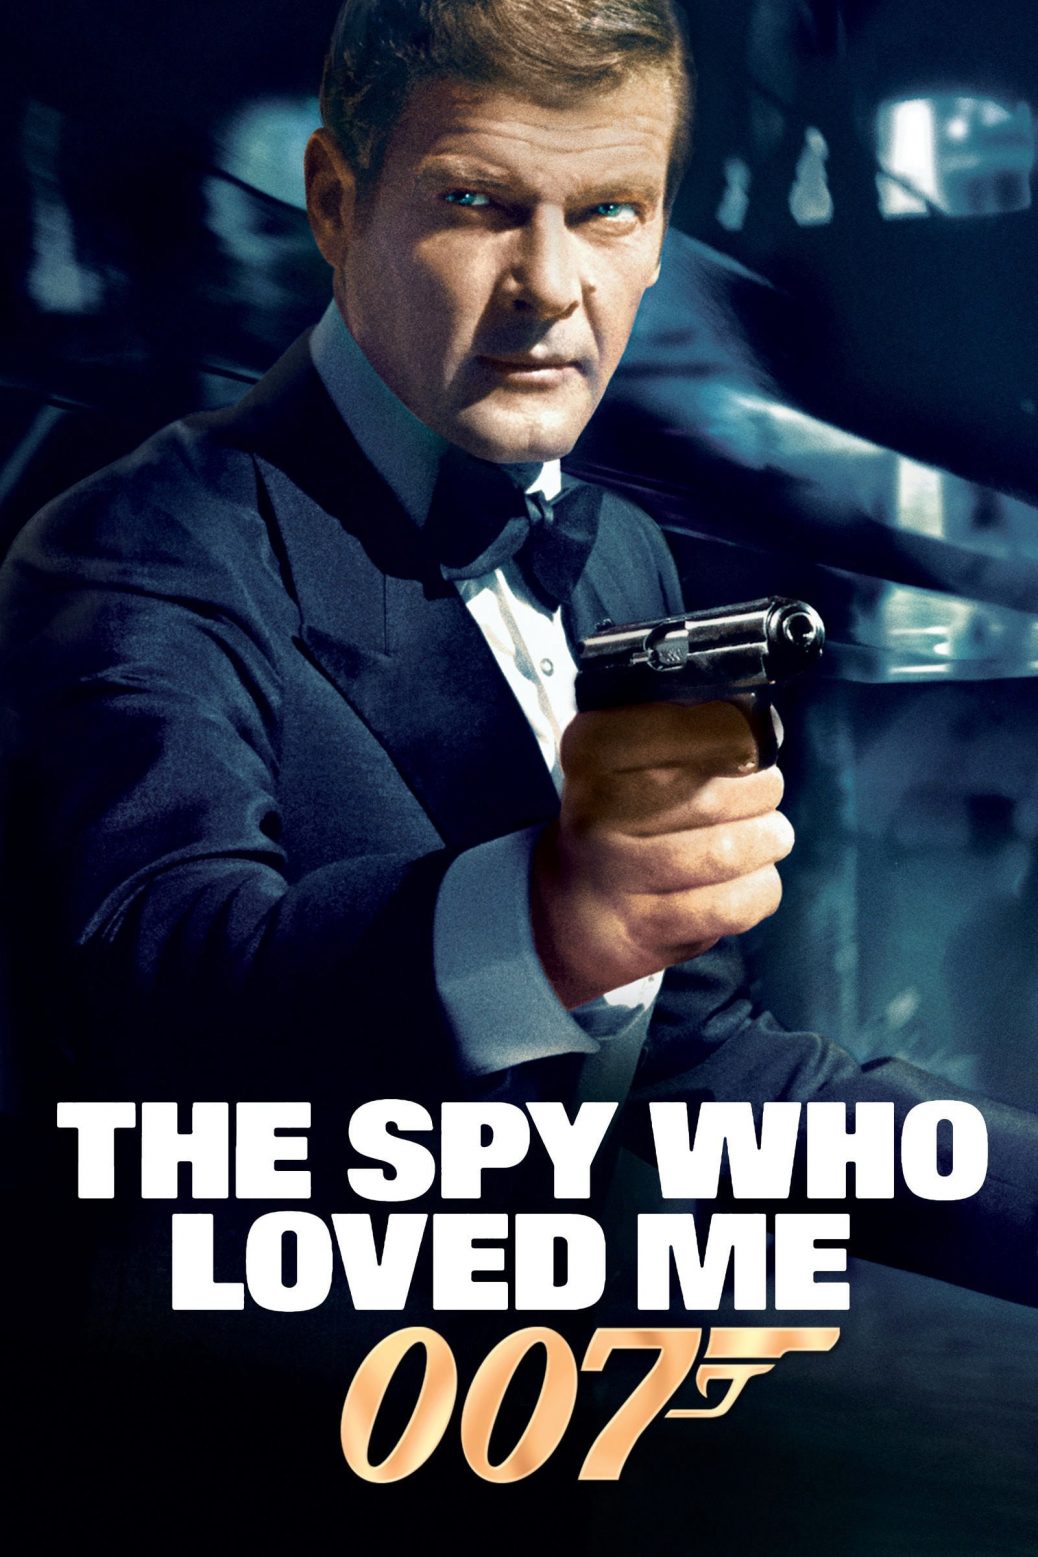 Poster for the movie "The Spy Who Loved Me"